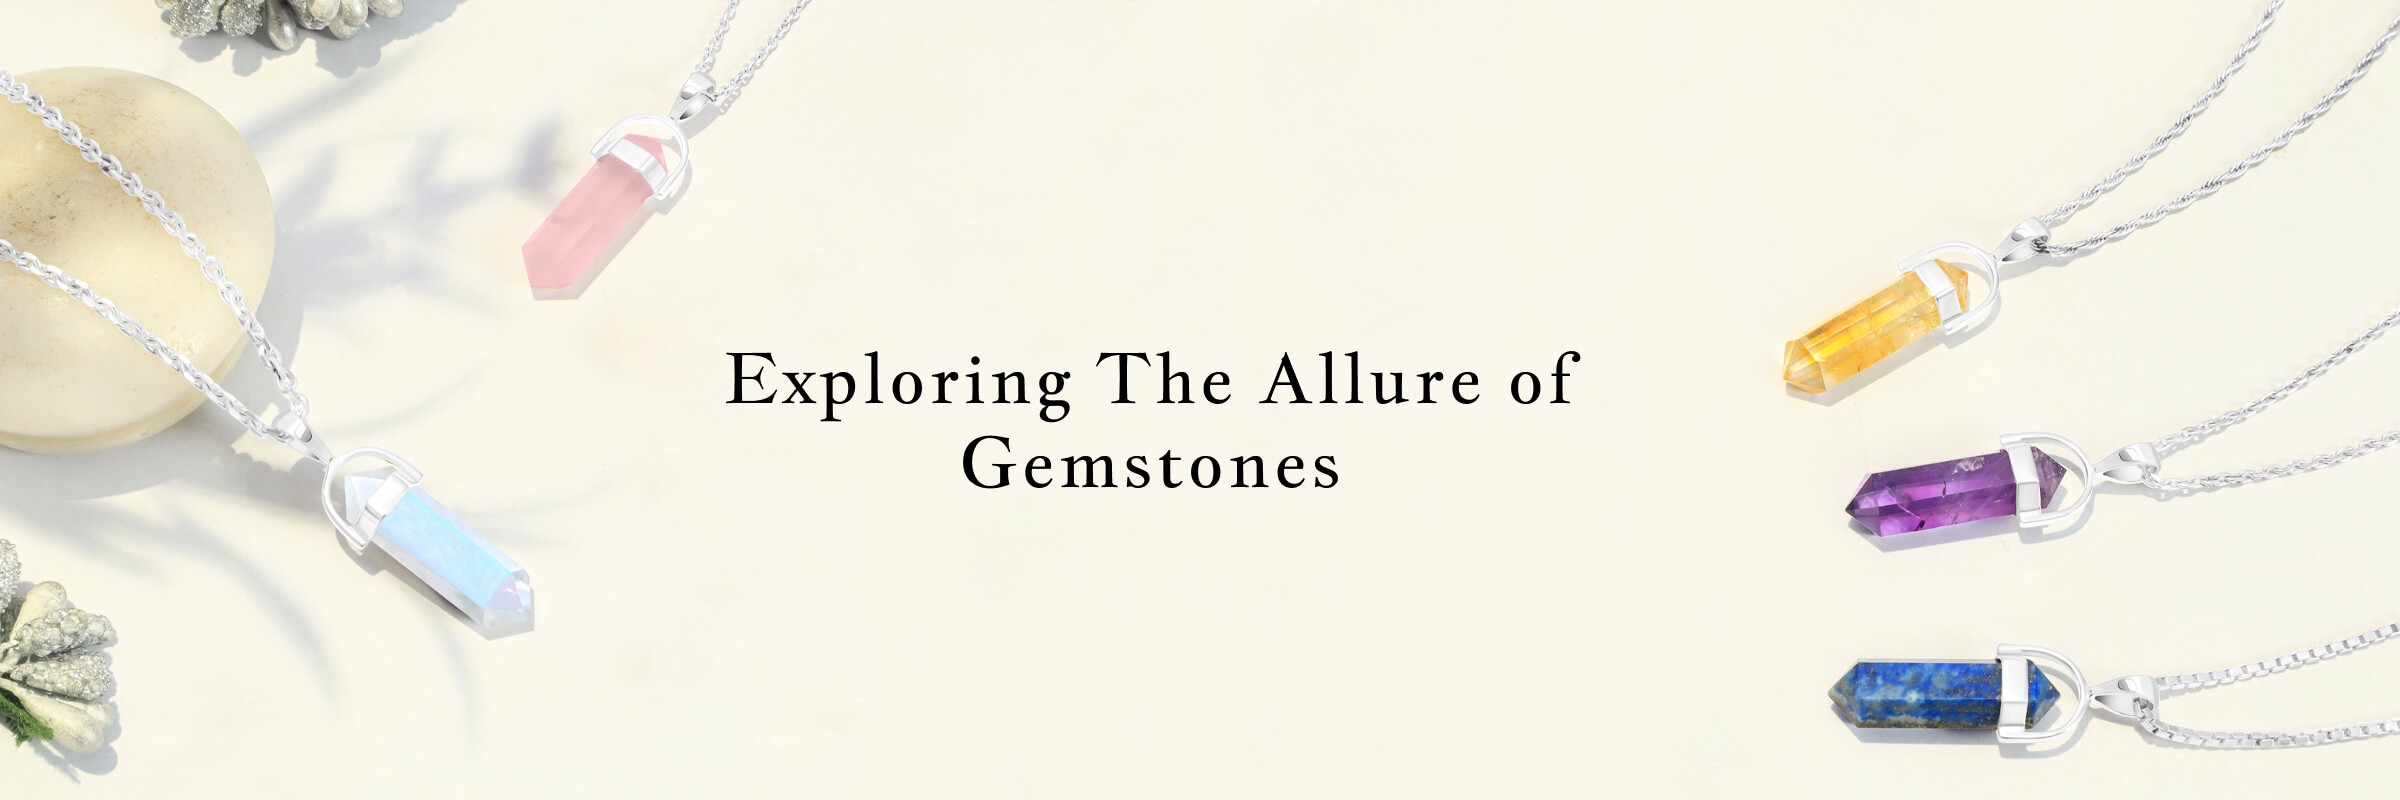 Your Guide to Gemstone